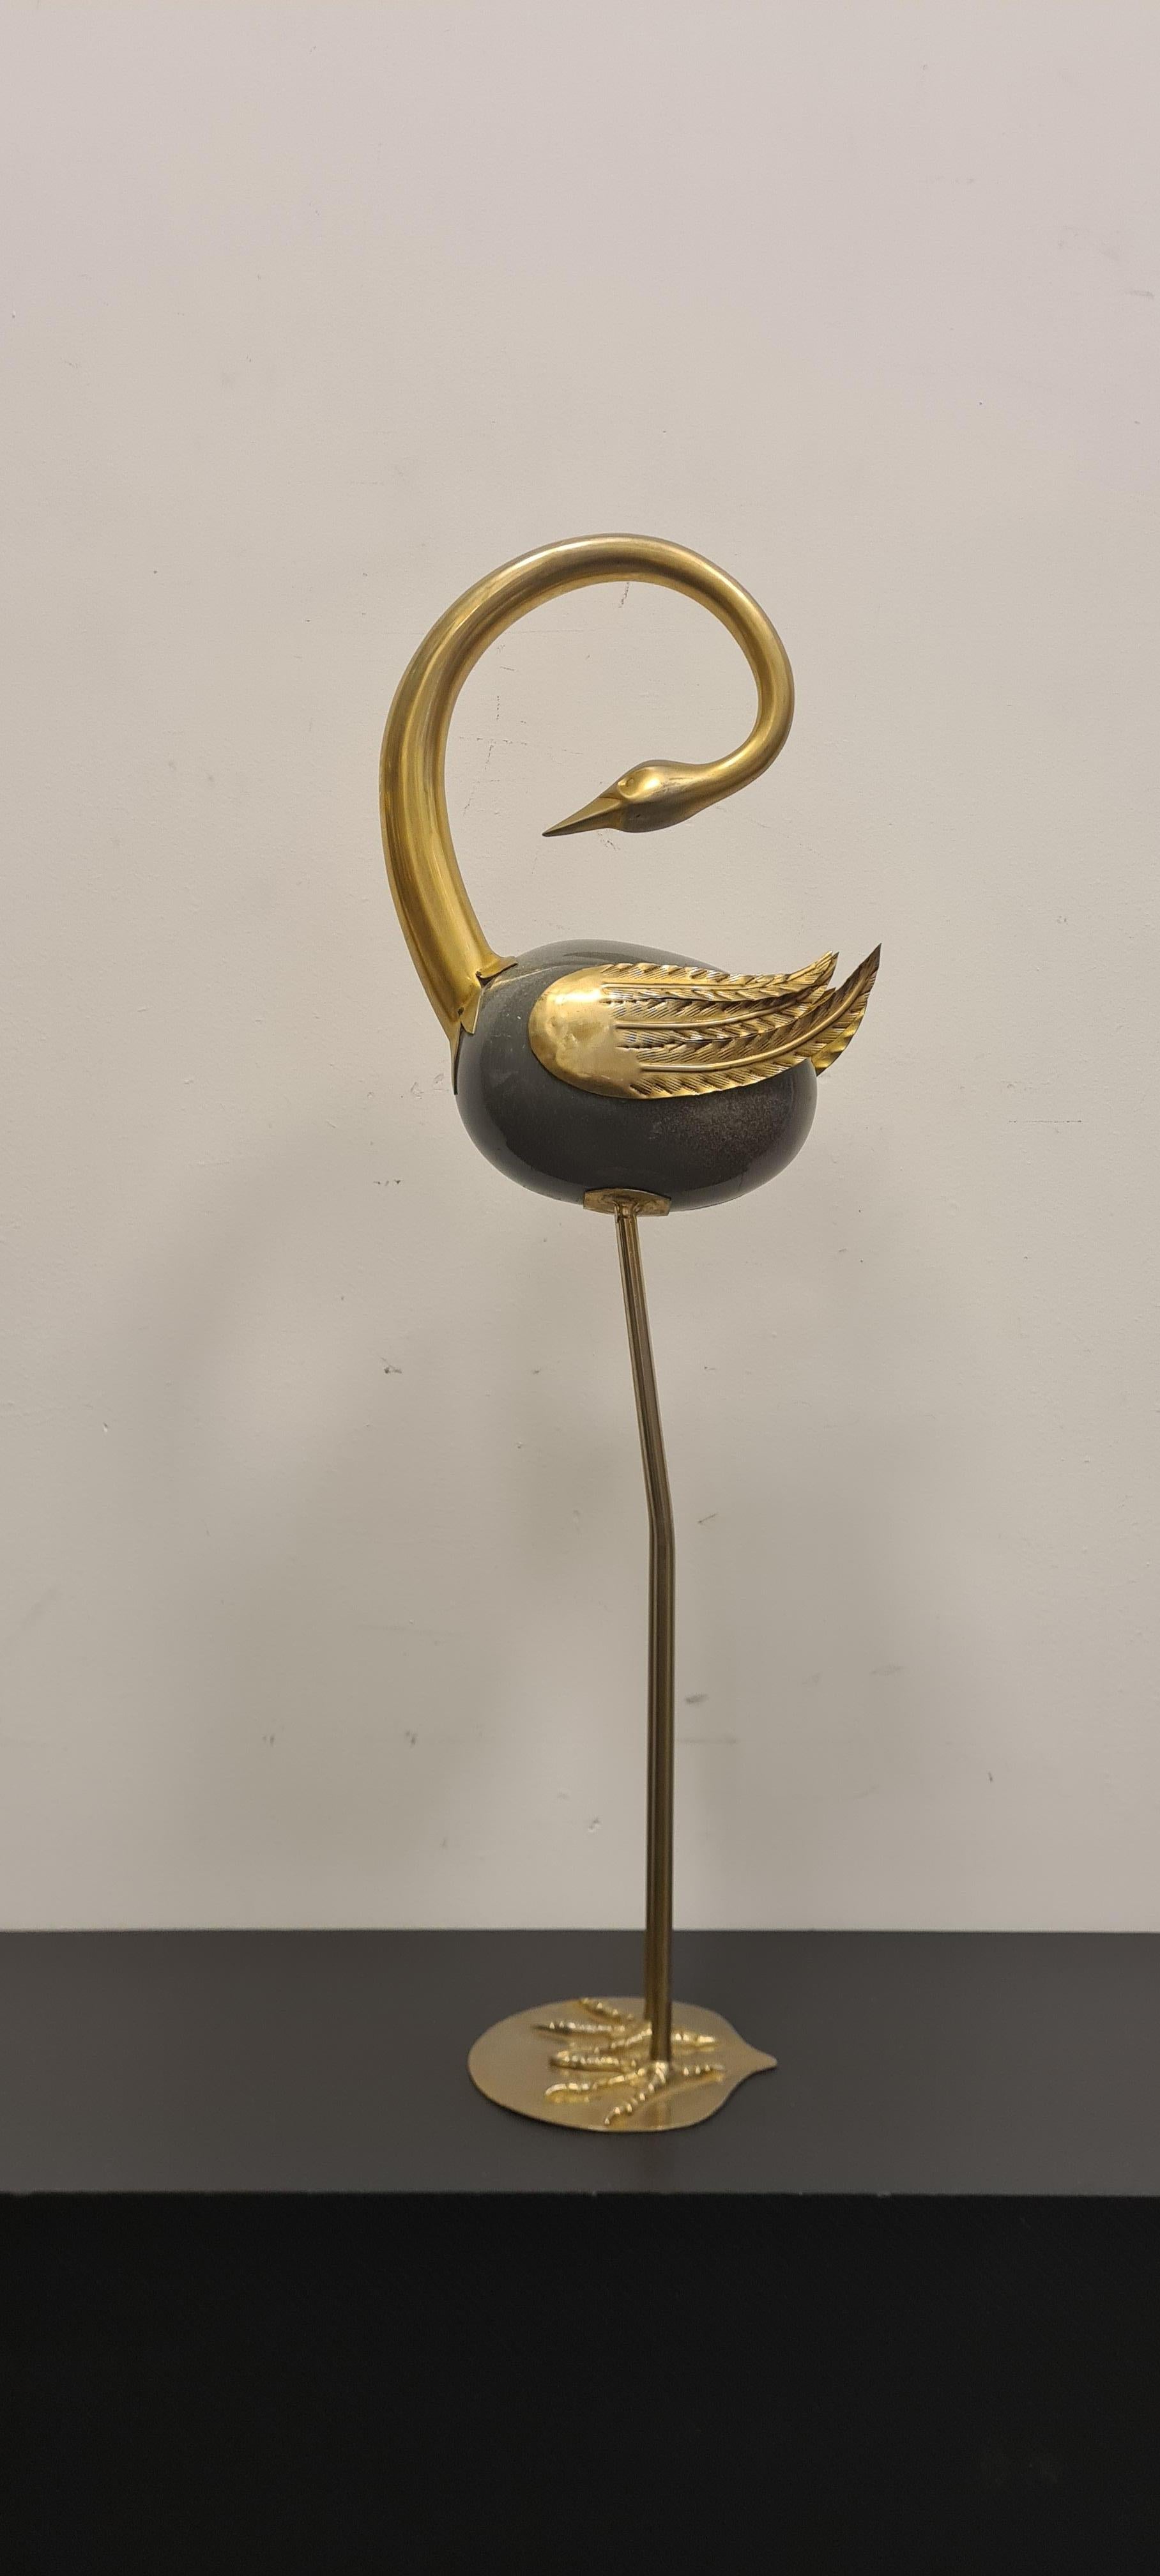 Statue depicting a heron made by Antonio Pavia.

Elegant heron made of lacquered metal and brass.

The heron features a central body made of gray lacquered metal and tulle the remaining parts such as base wings and neck are made of brass.

This